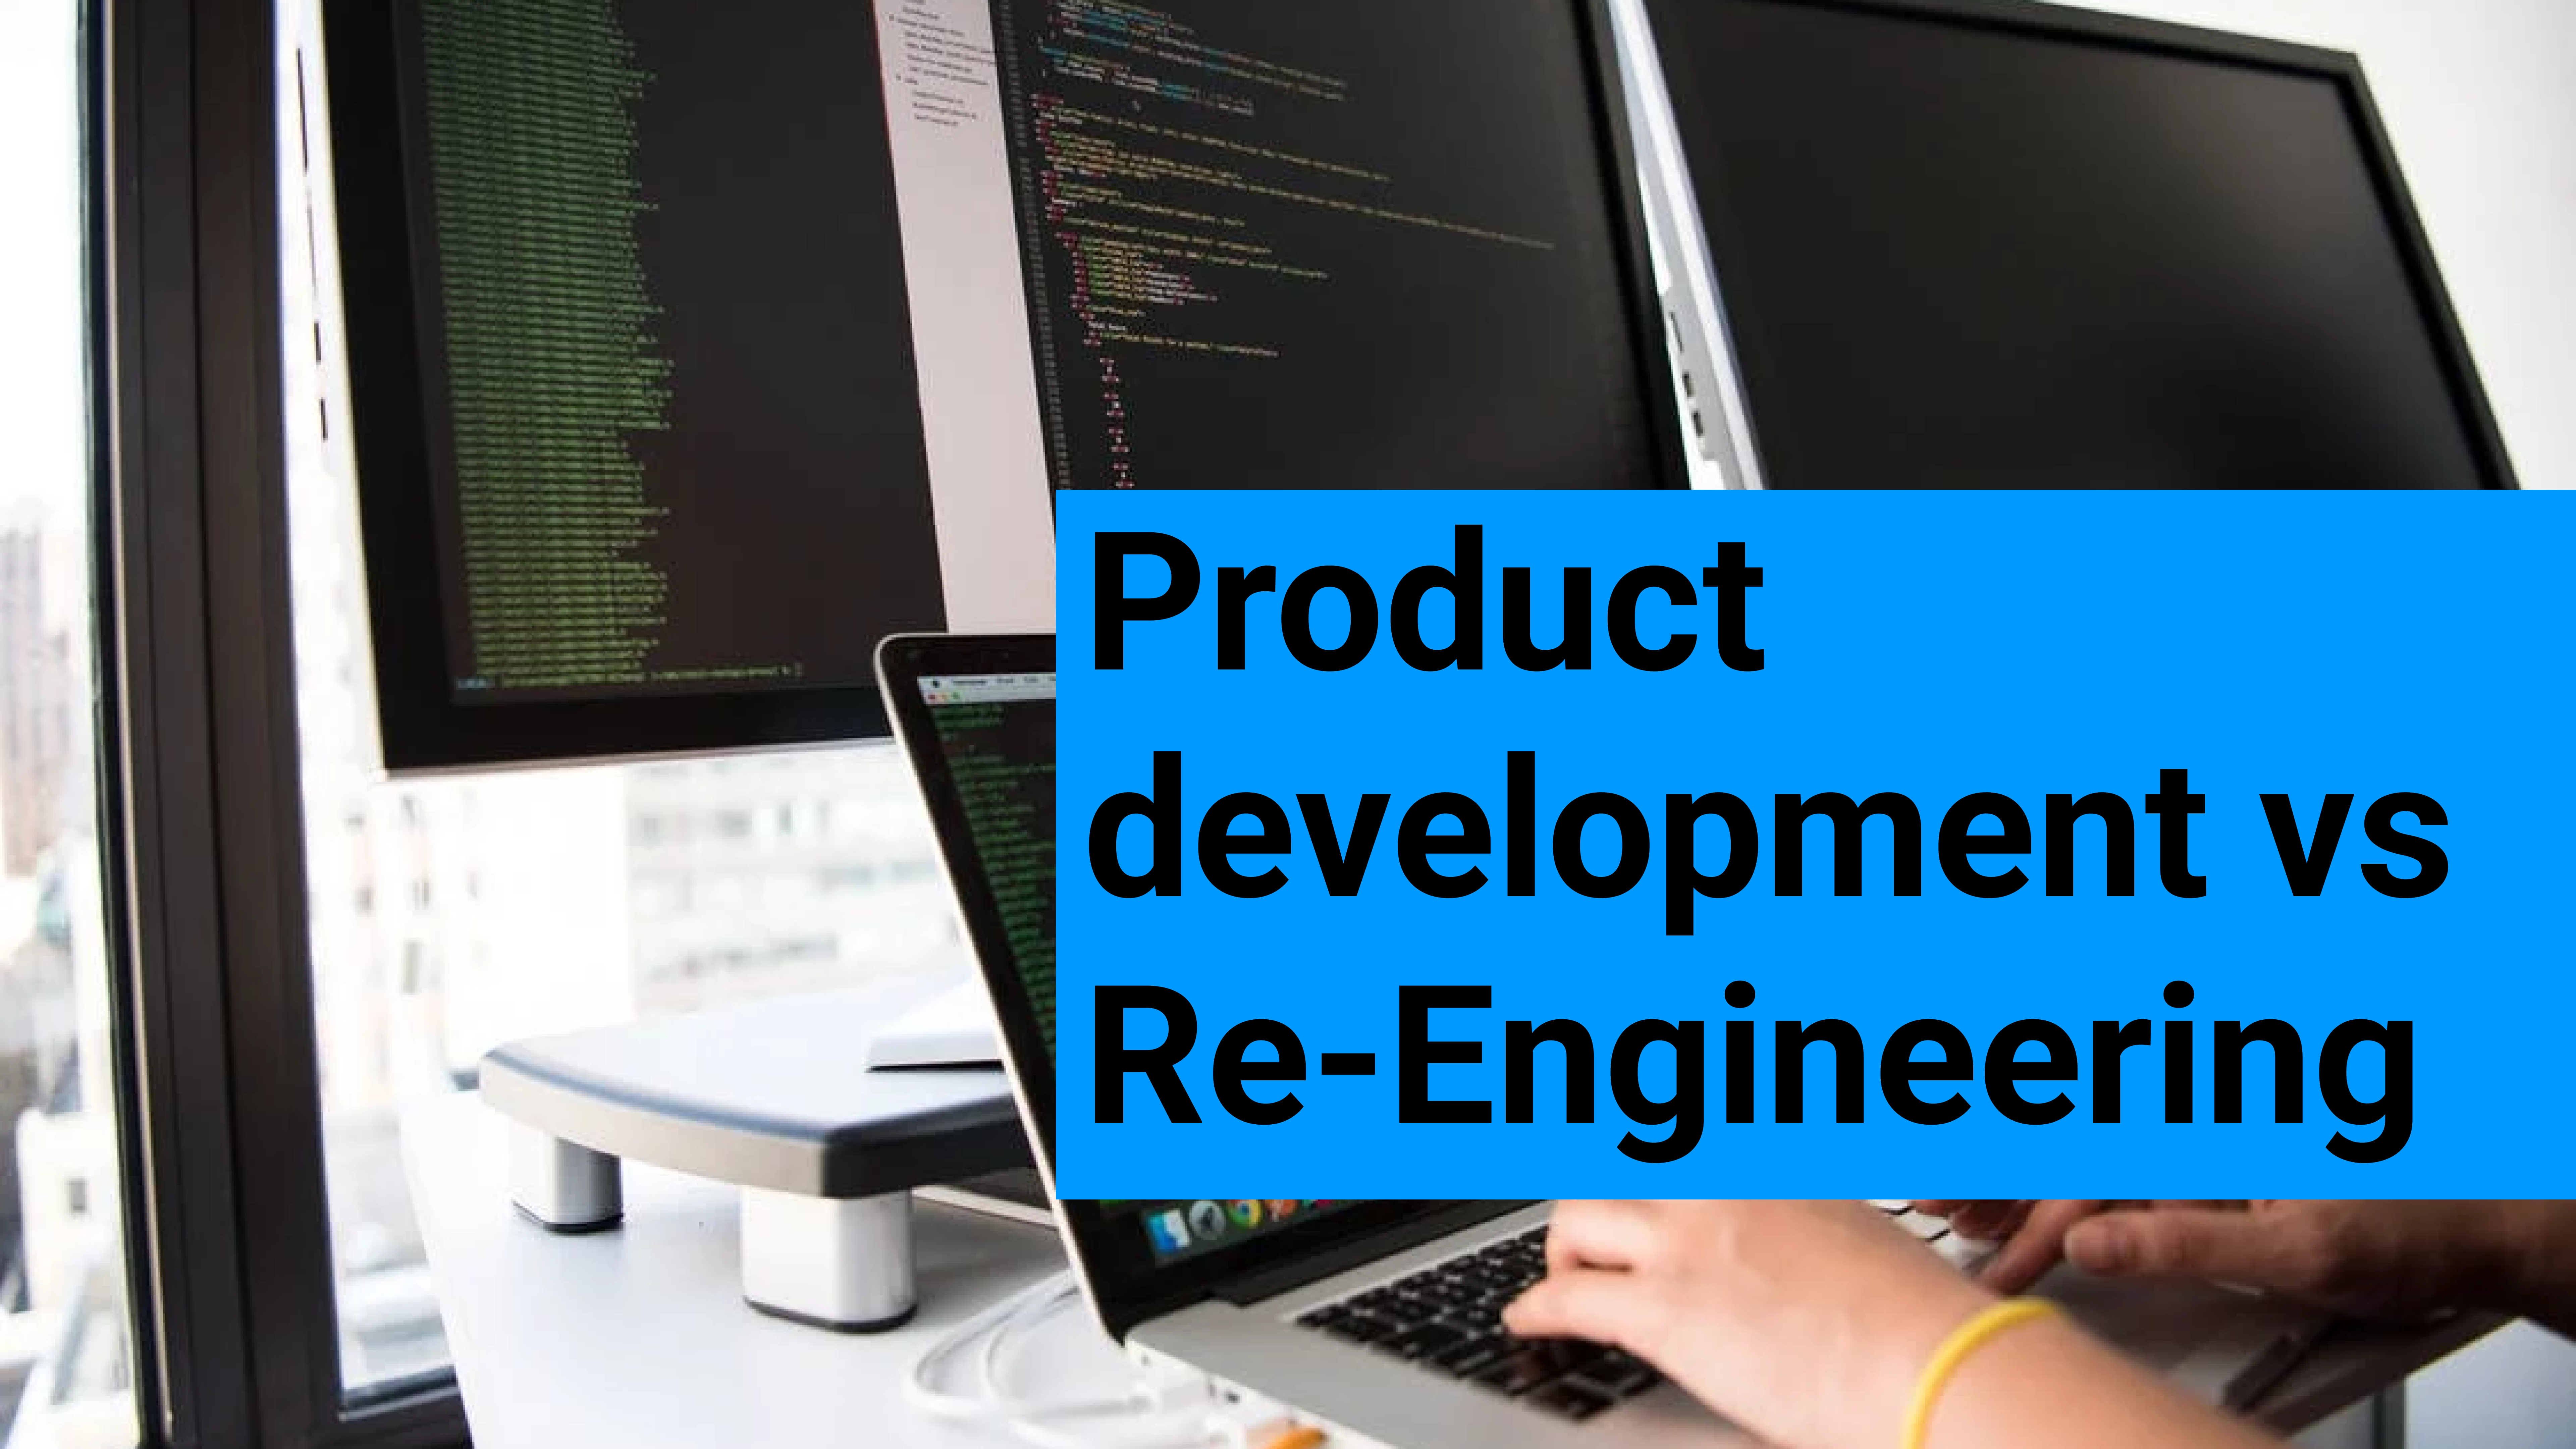 Difference Between Product Development And Re-Engineering